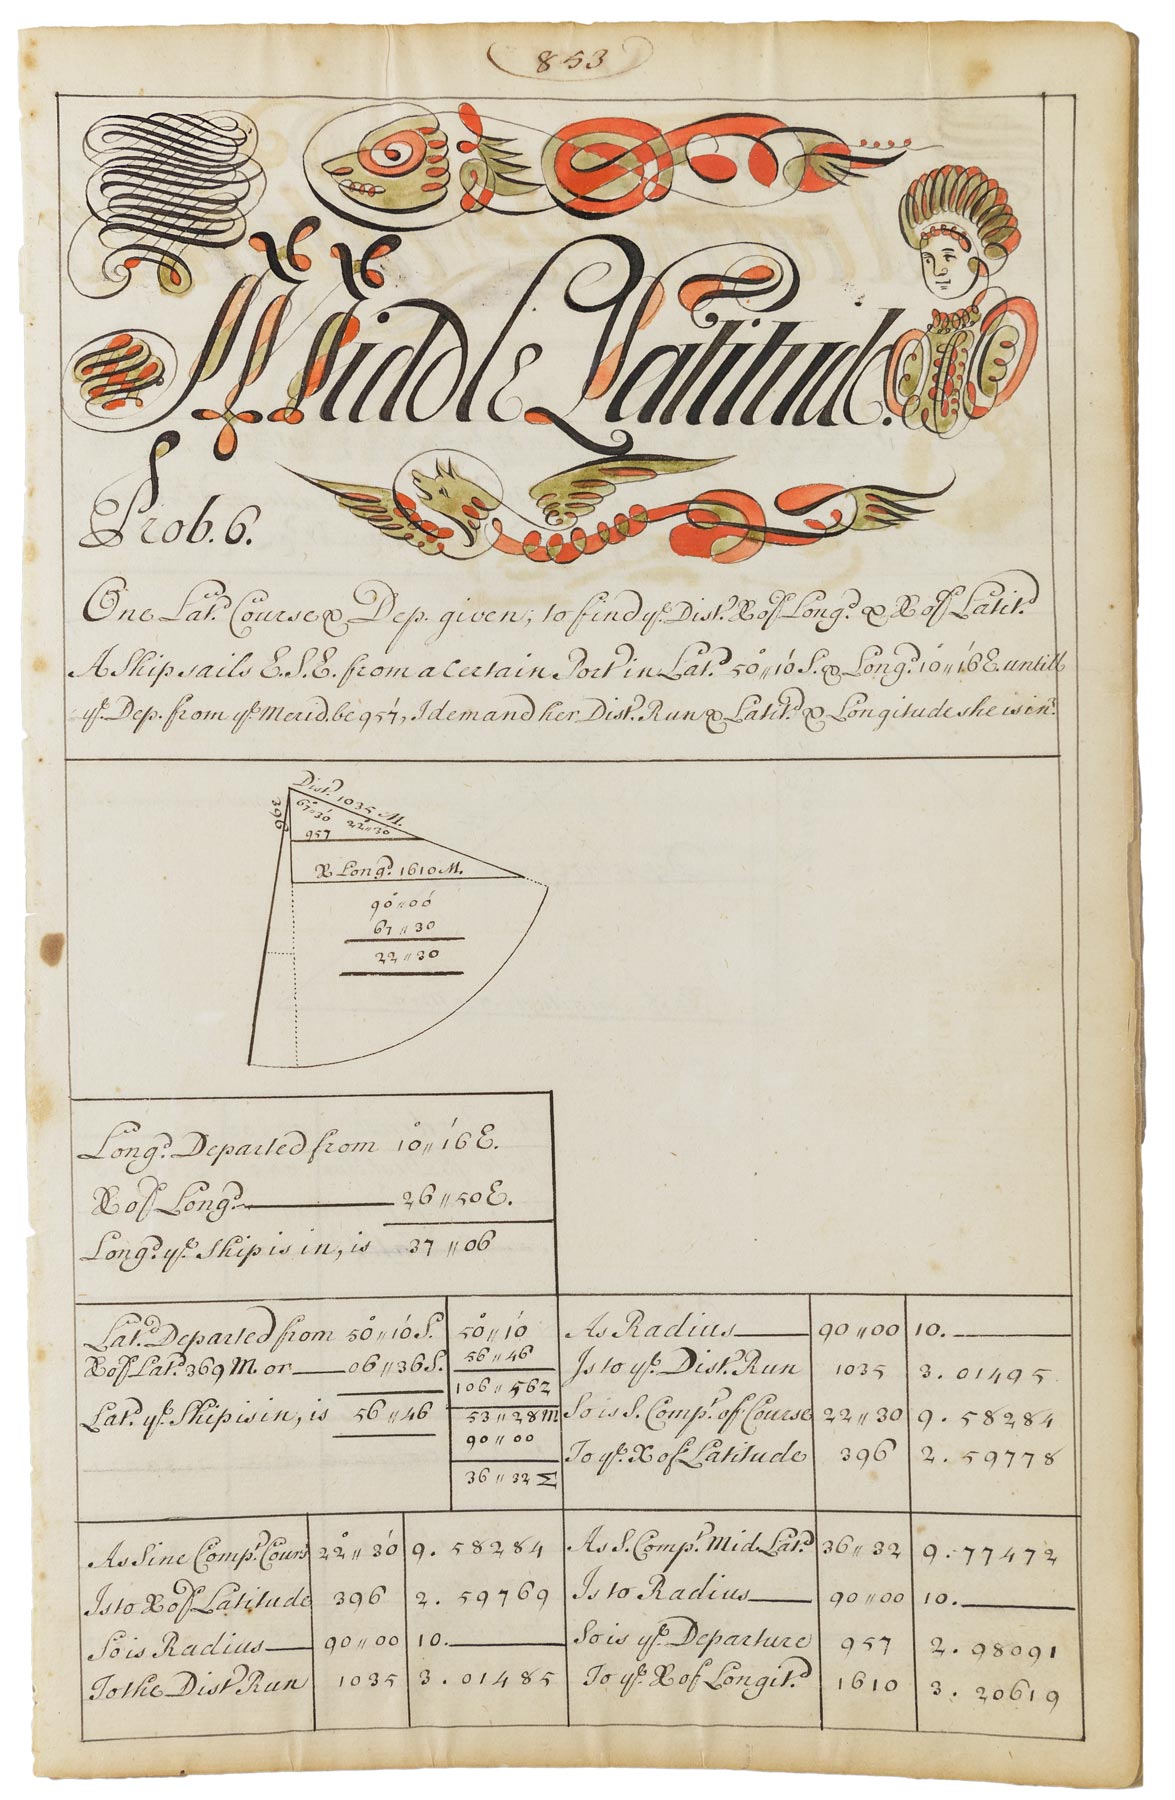 Thomas Earl, Middle Latitude, page 853 from his 1740/41 copybook